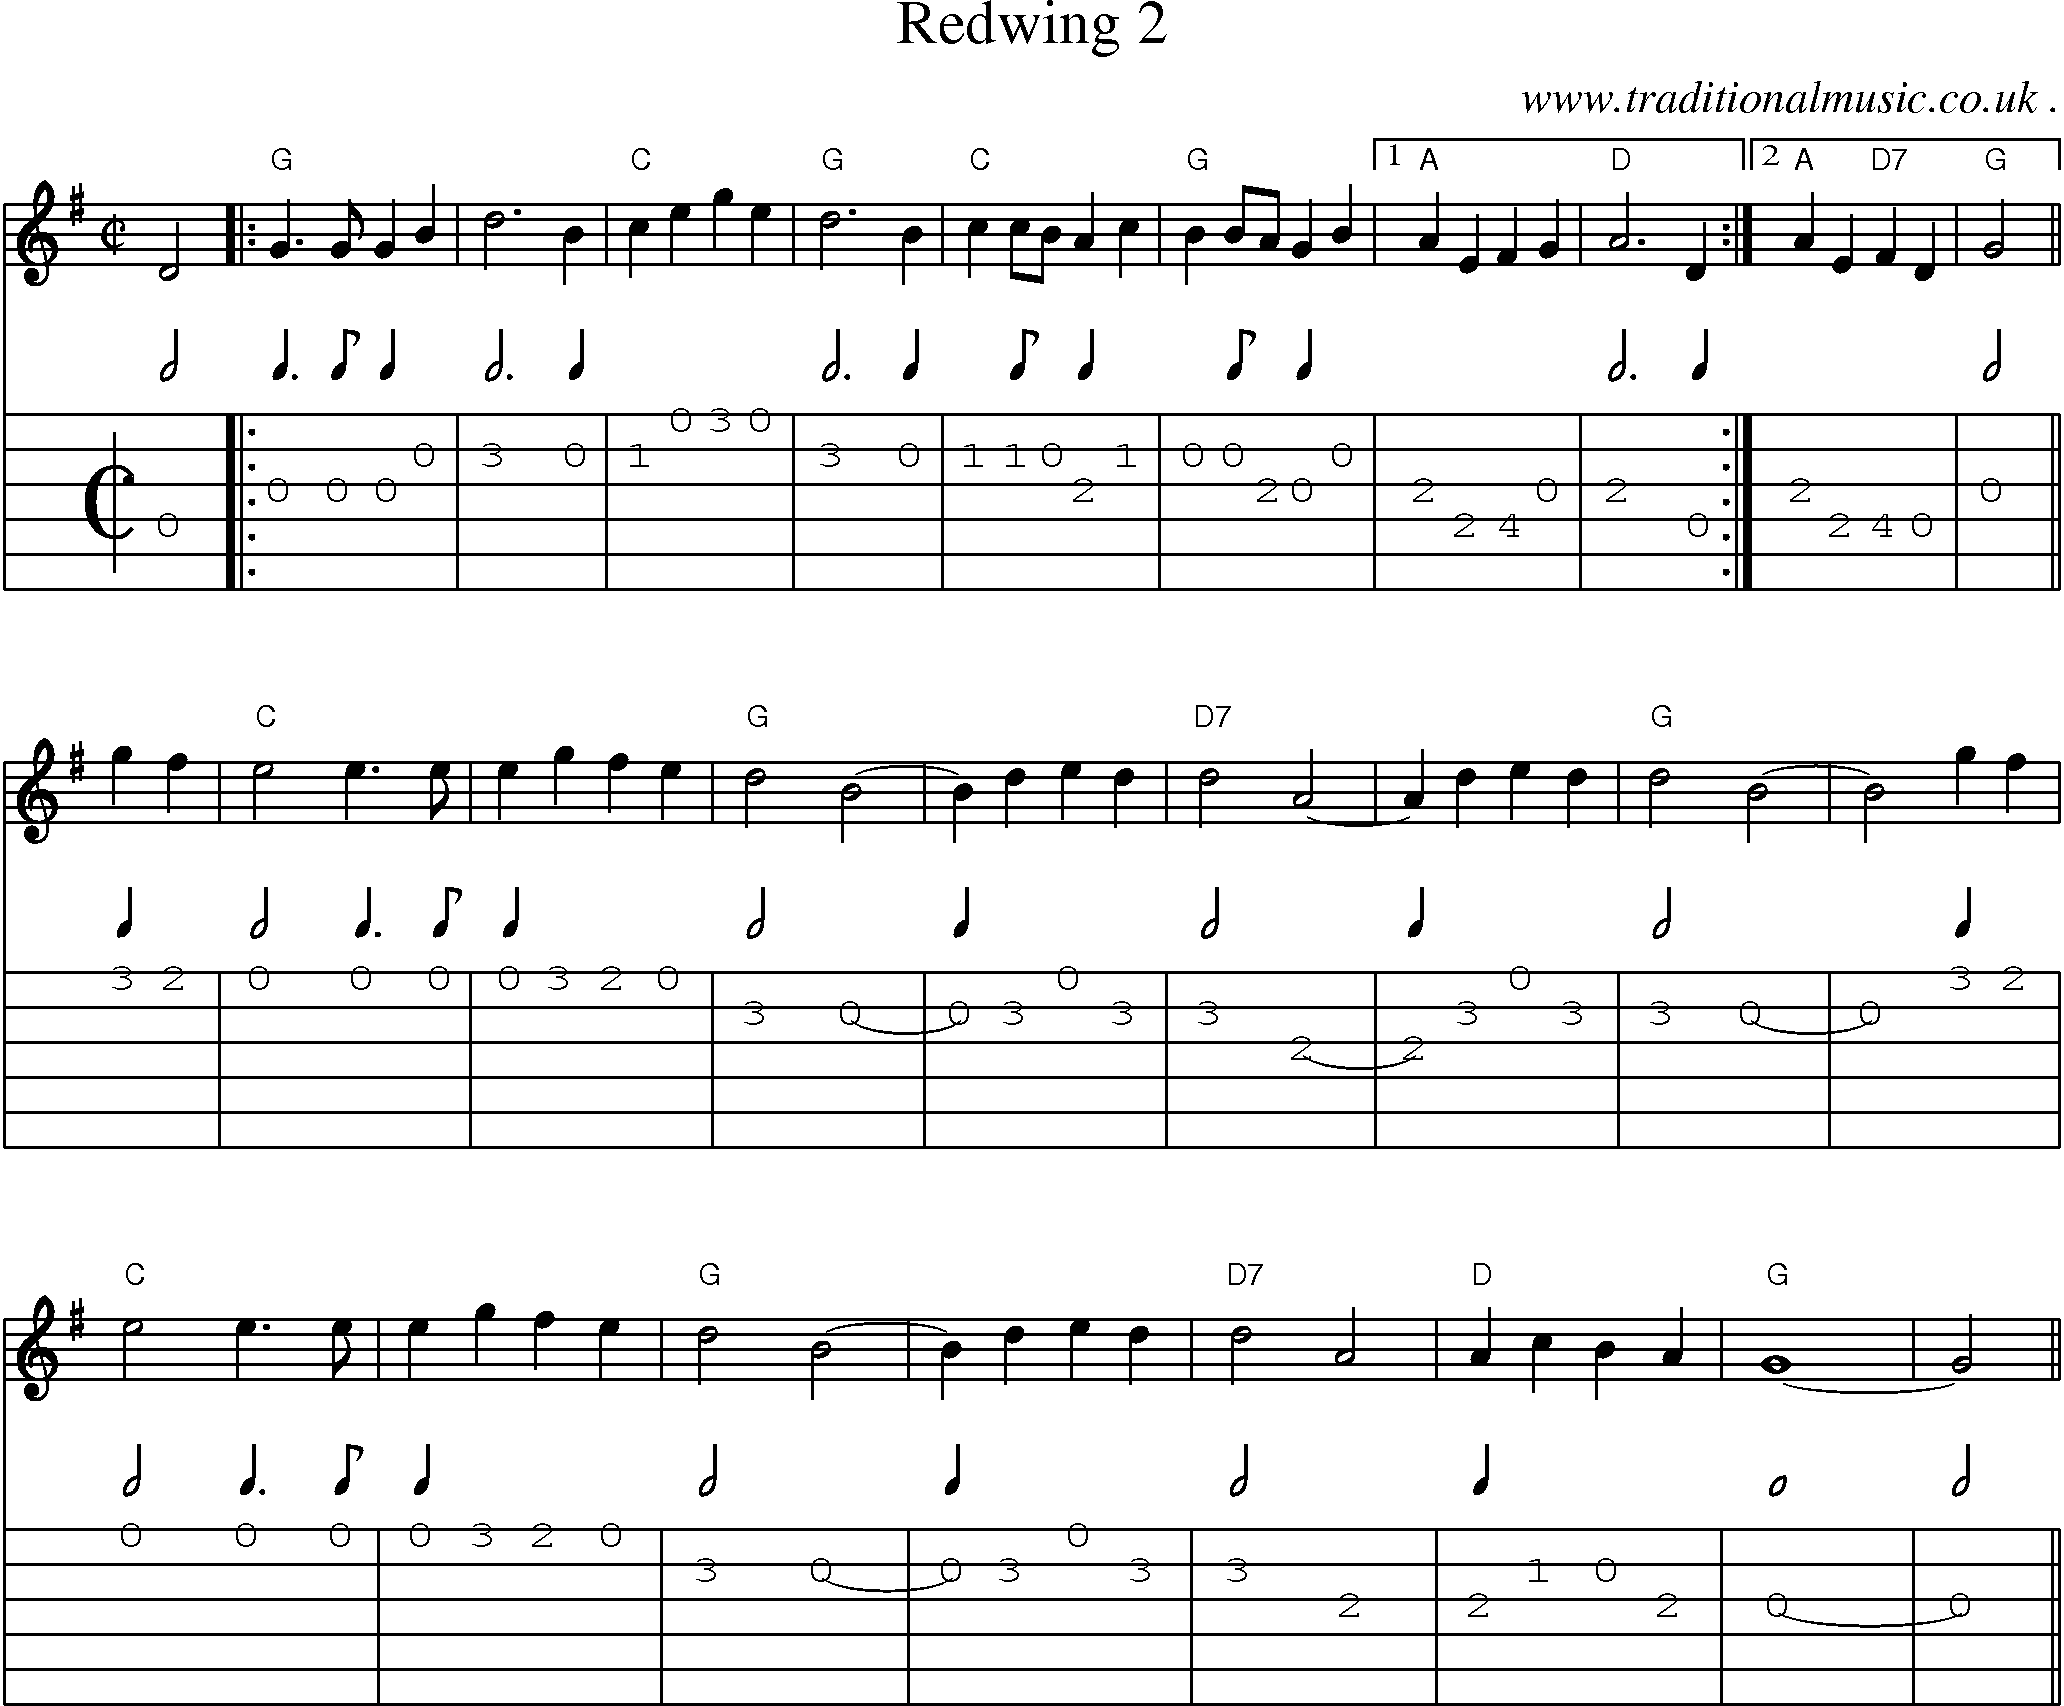 Music Score and Guitar Tabs for Redwing 2